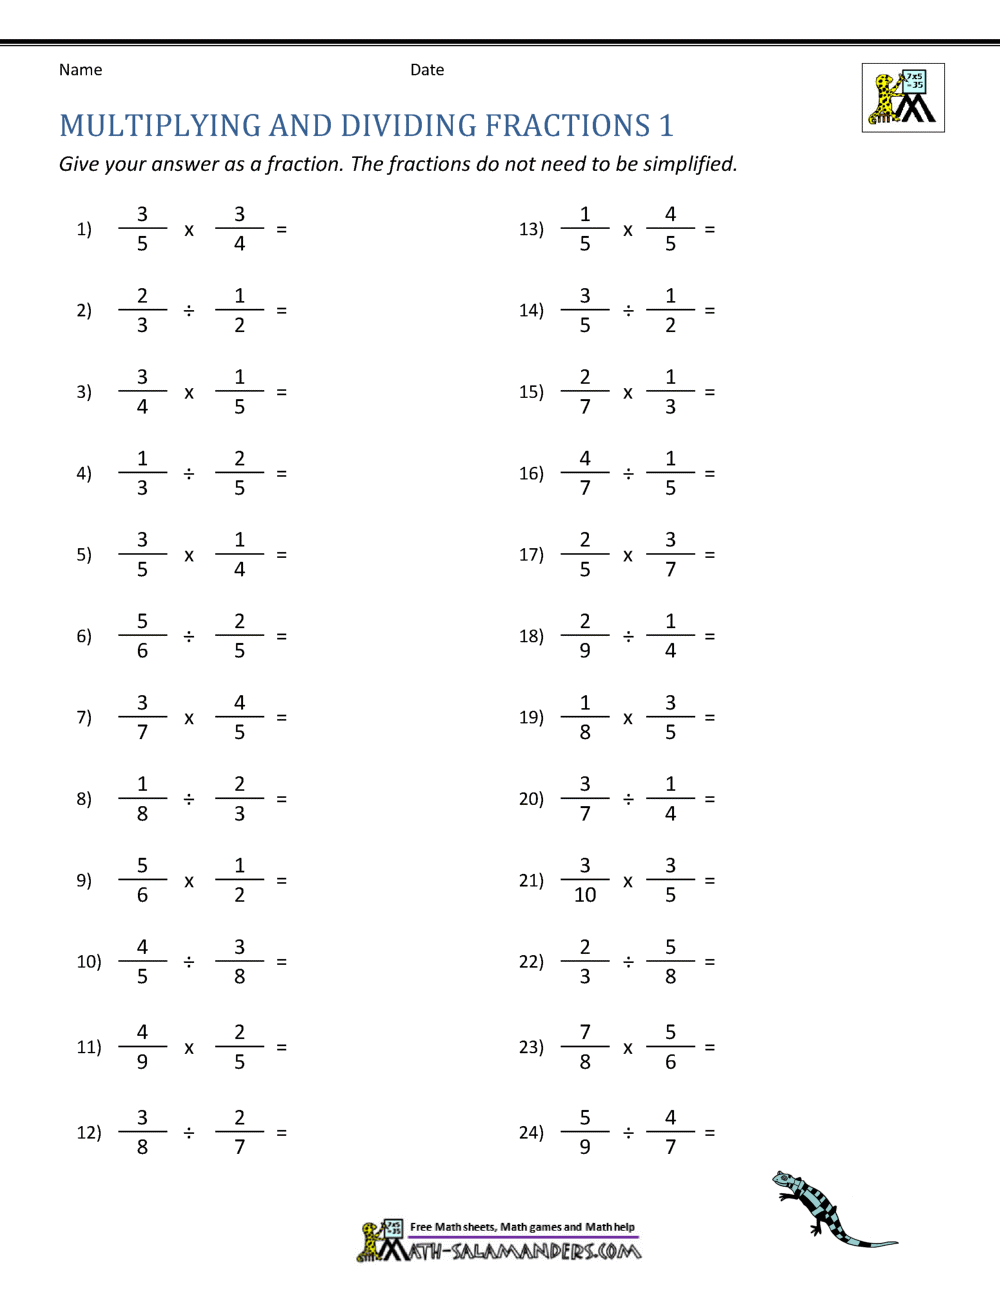 add-subtract-multiply-and-divide-fractions-worksheet